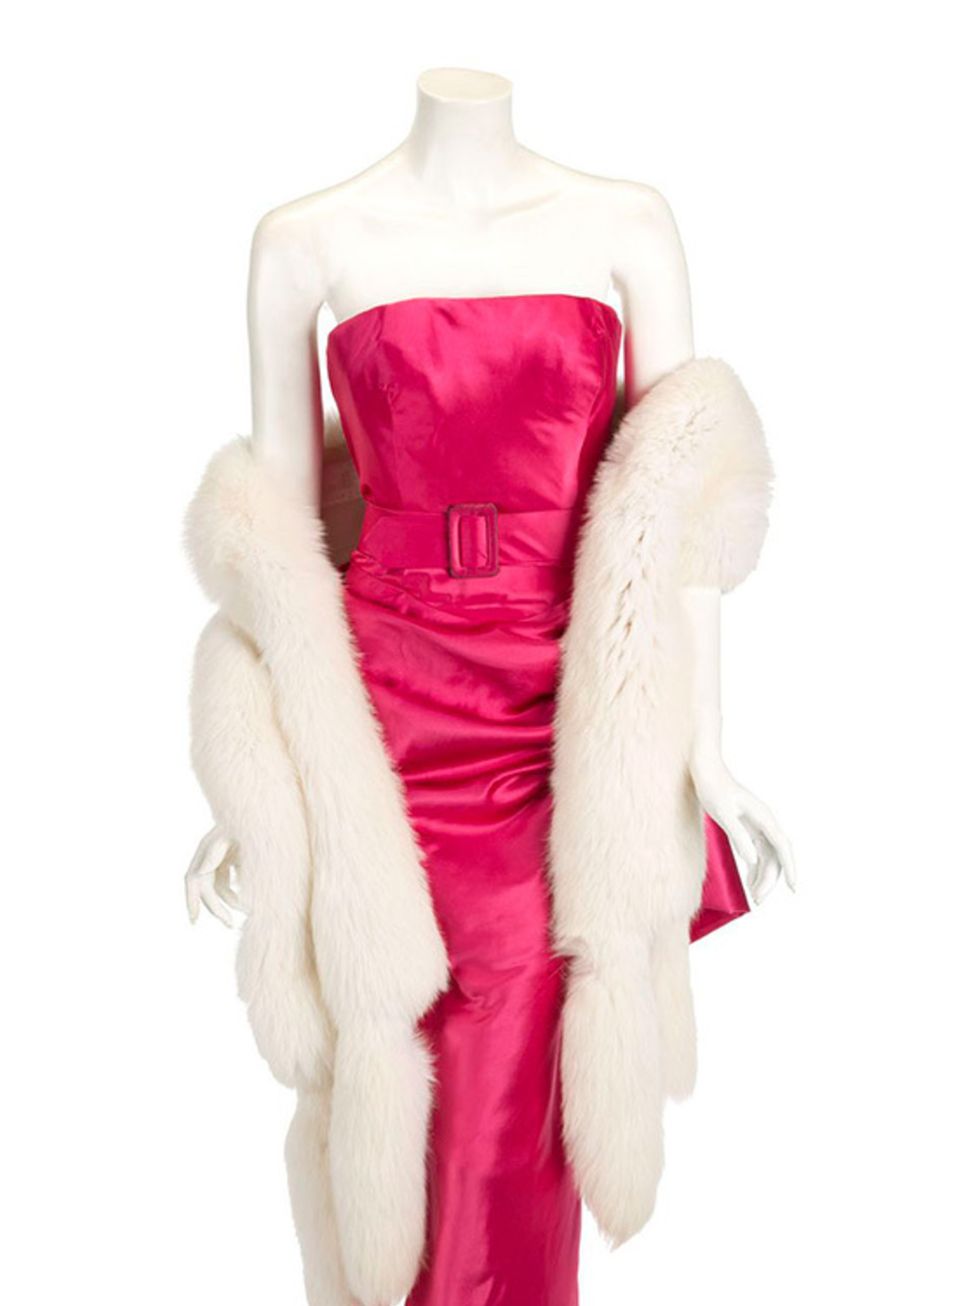 <p>This dress from the Material Girl video is expected to go for between $40,000-$60,000 (about £25,200-£37,800). To get the stole as well, you'll need another $4,000-$6,000 (about £2,500-£3,700).</p>